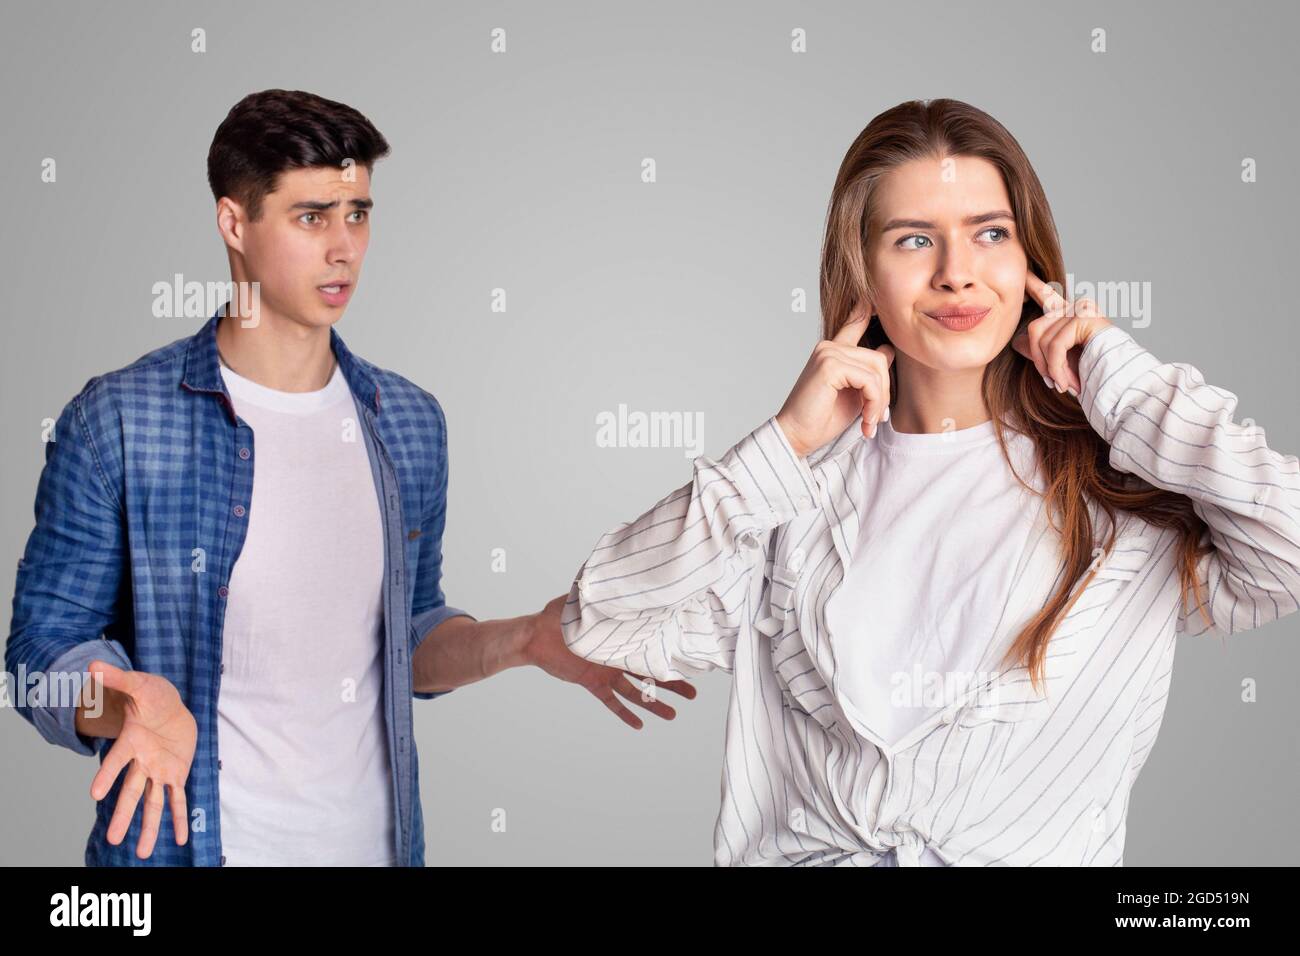 Quarrel and showdown. Sad woman covers her ears with fingers, upset man expresses negative emotions, gestures, gives arguments and looks at lady, isol Stock Photo